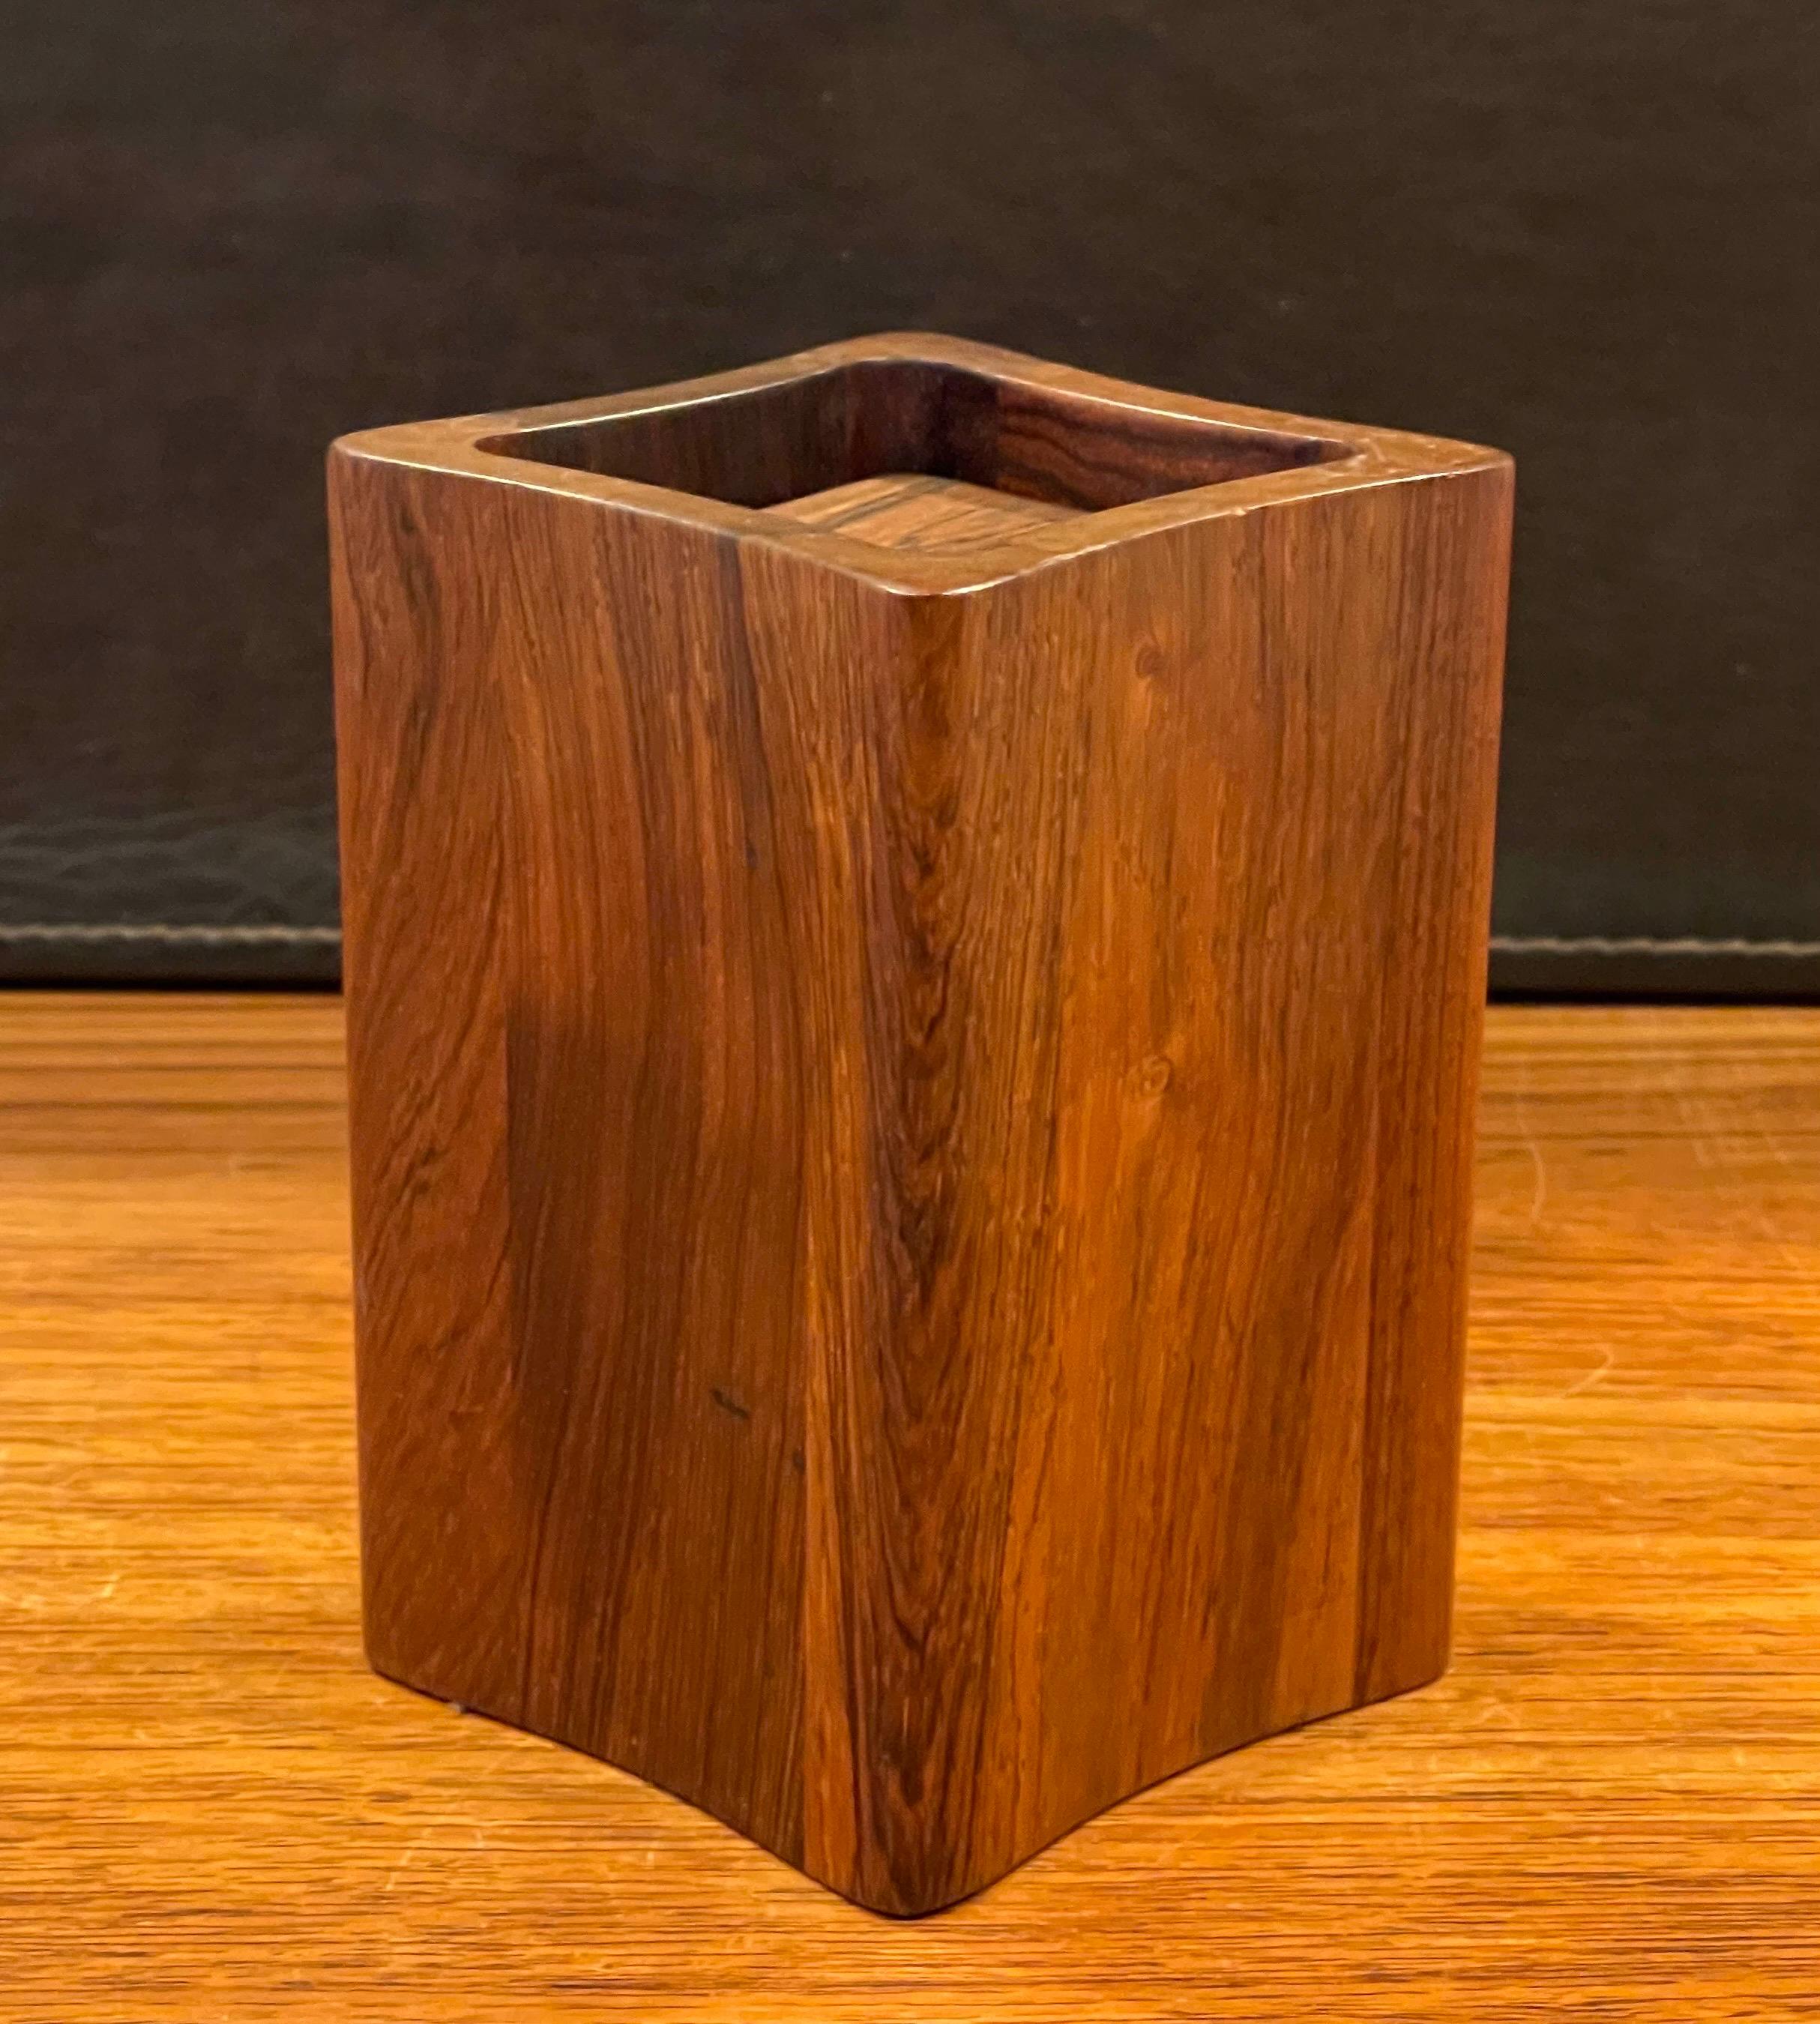 20th Century Palisander & Rosewood Box / Humidor by Jens Quistgaard for Dansk Rare Woods For Sale